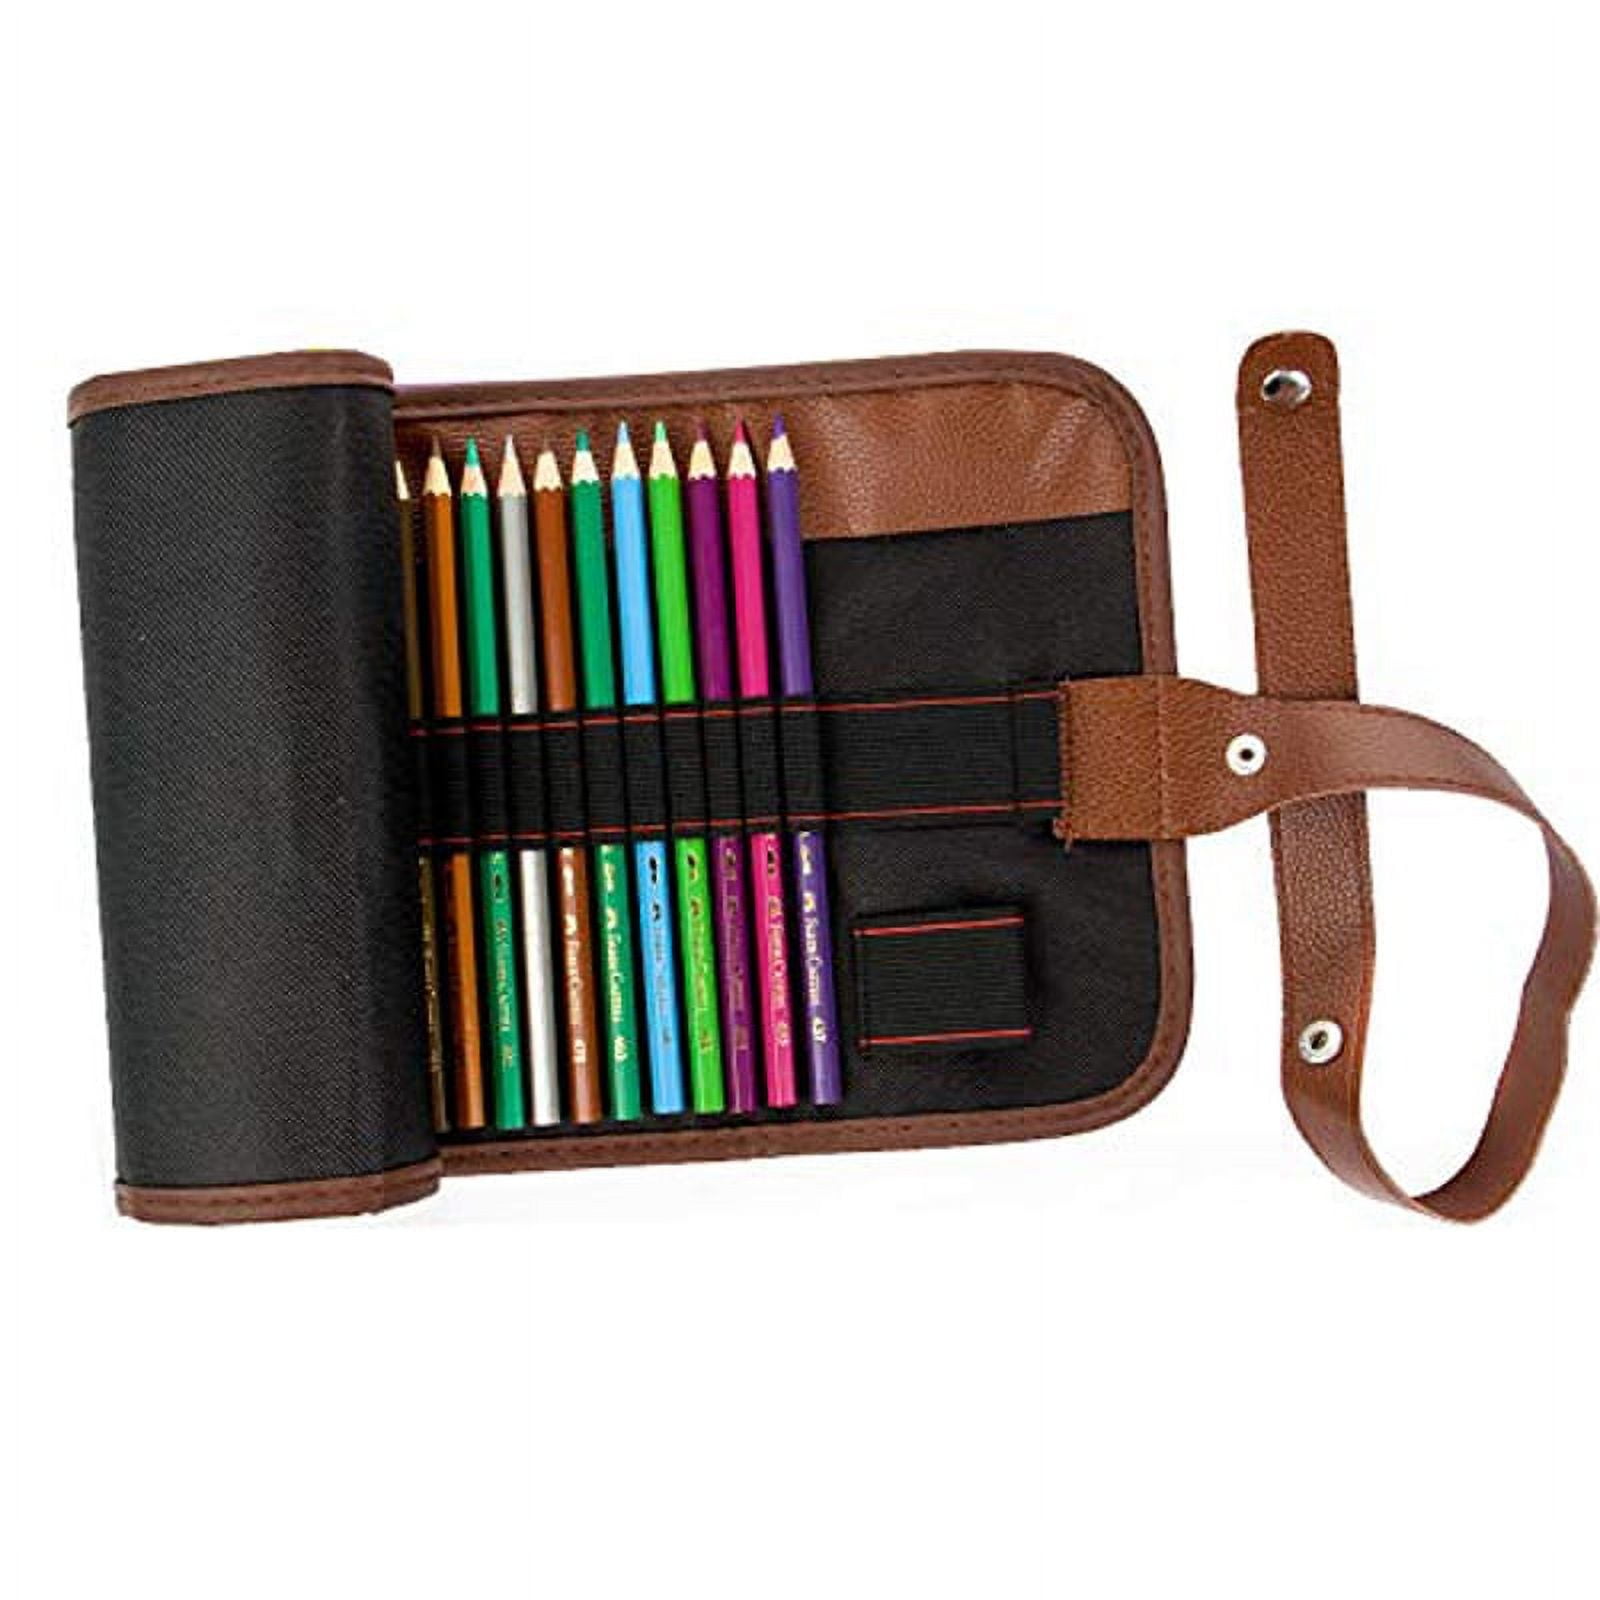 DIYOMR 24/36/72 Slots Pencil Wrap Pencil Rolls, Artist Colored Pencils Roll  Up Bag Short Brushes Pouch Case Pencils Organizer for Drawing Coloring and